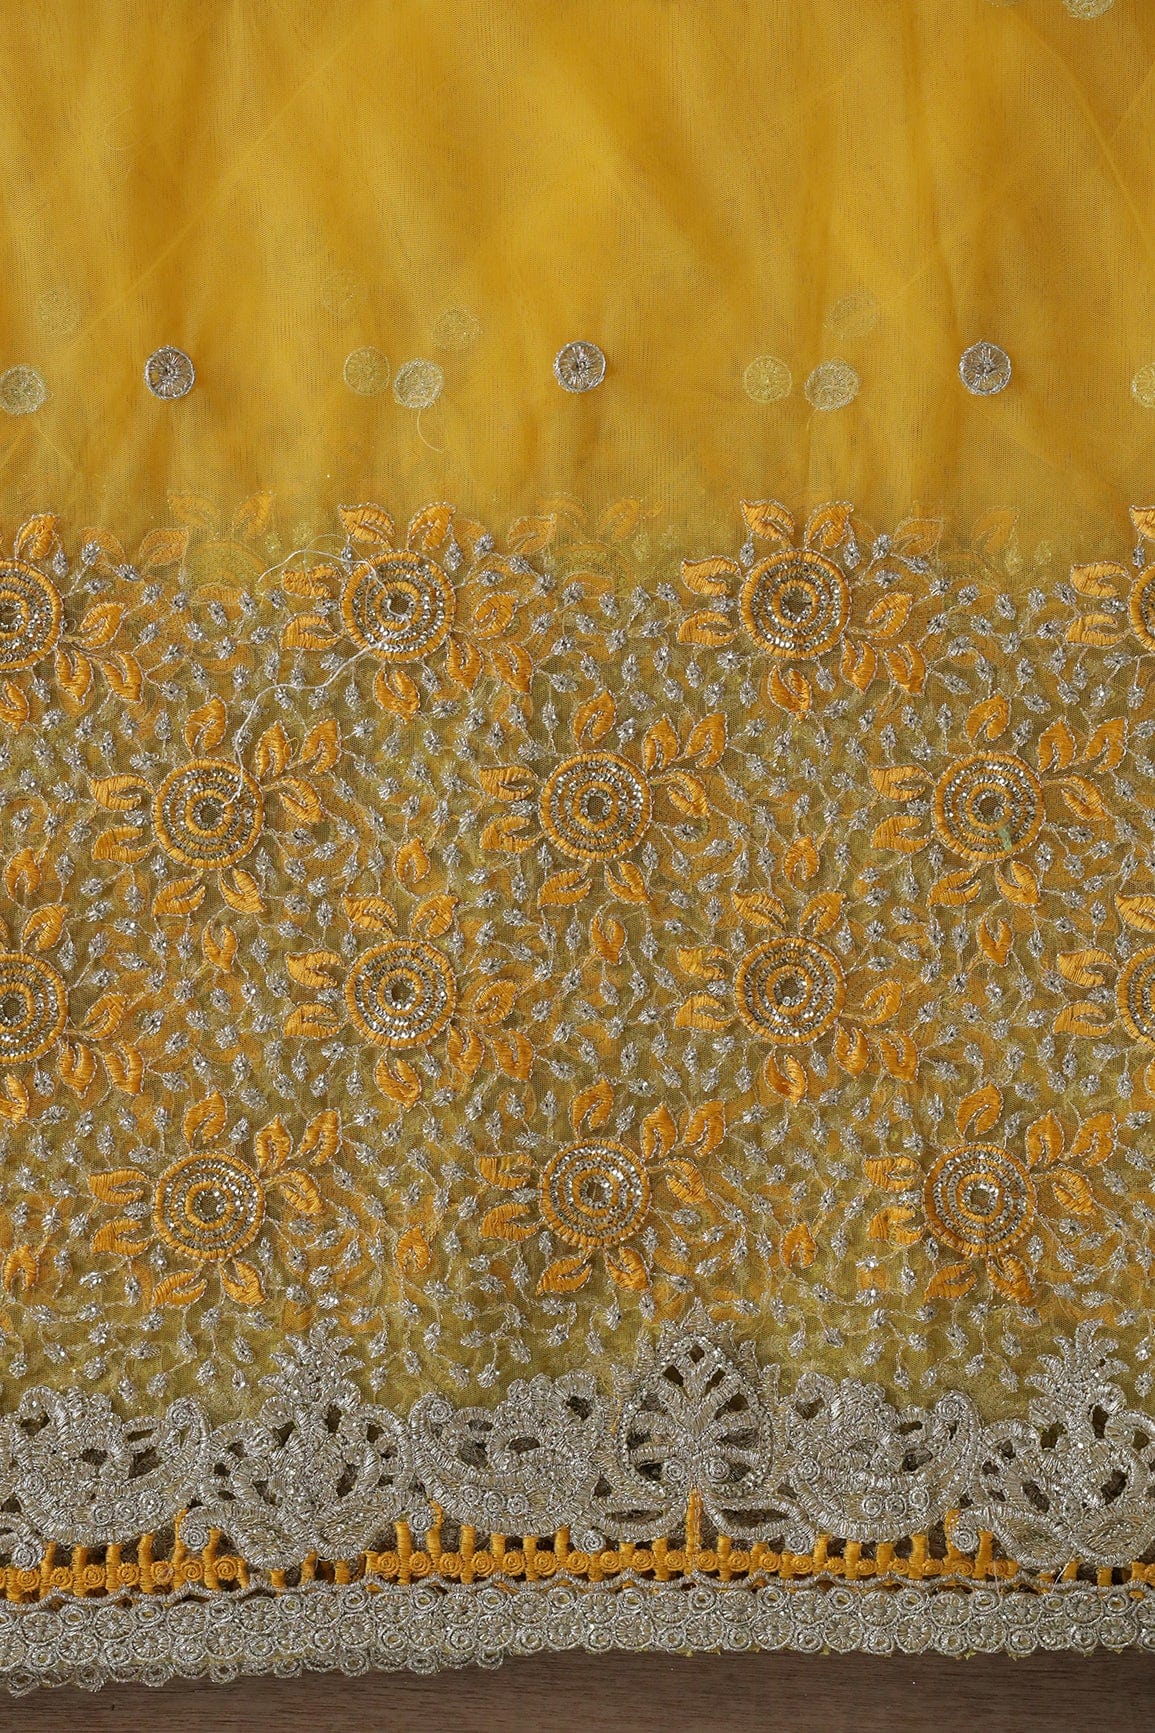 doeraa Embroidery Fabrics Big Width''56'' Yellow Thread With Zari Floral Embroidery Work On Yellow Soft Net Fabric With Border